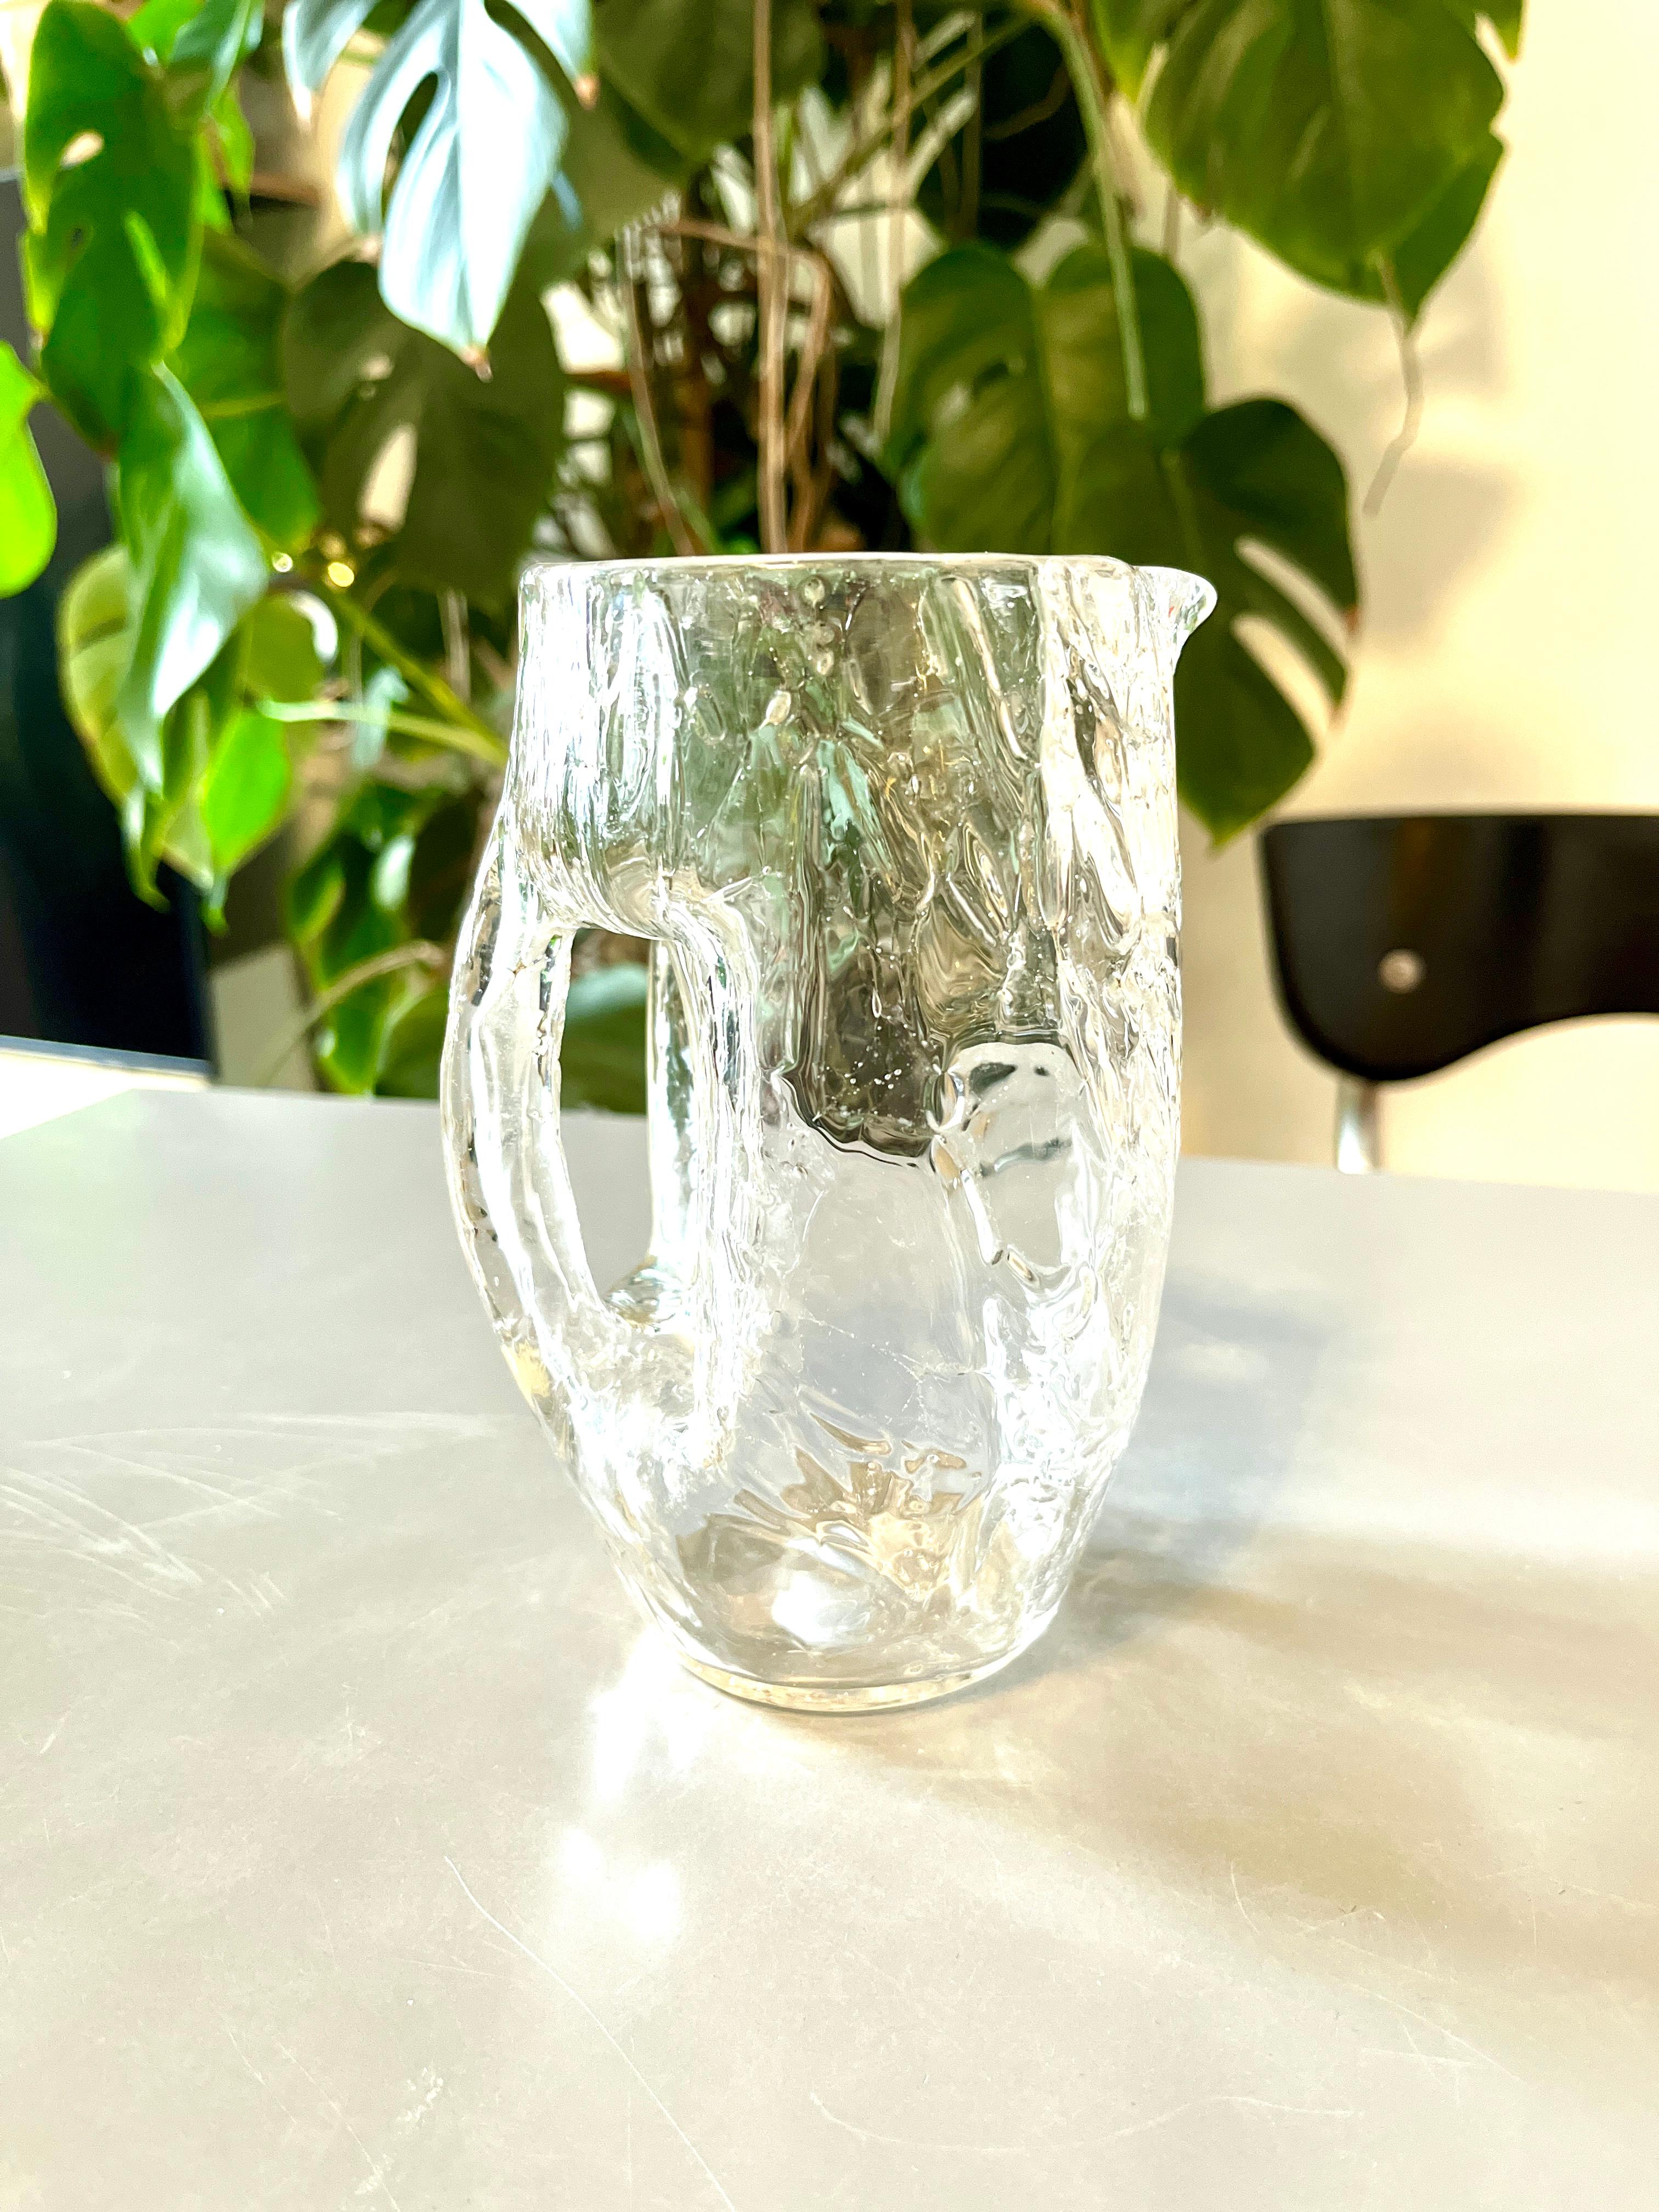 A beautiful mouth blown Art Nouveau / Jugendstil glass pitcher, dated around 1900, designed by Vienna Secessionist Kolo Moser. This lovely jug is handmade of clear crystal glass and has an amazing ice crackle „crocodile skin“ pattern, a polished